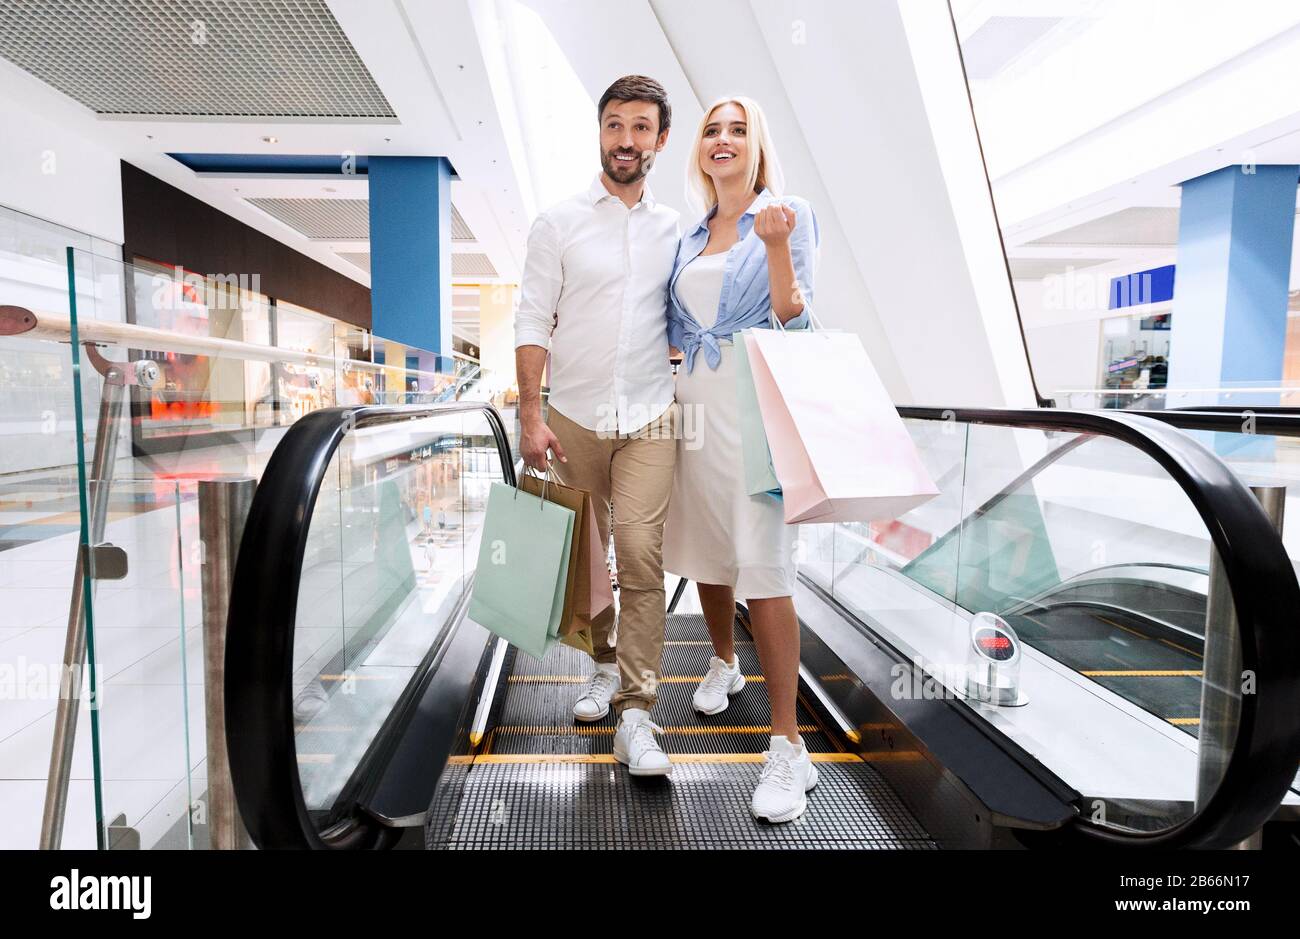 Couple Holding Shopper Bags Getting Off Escalator Stairs In Mall Stockfoto